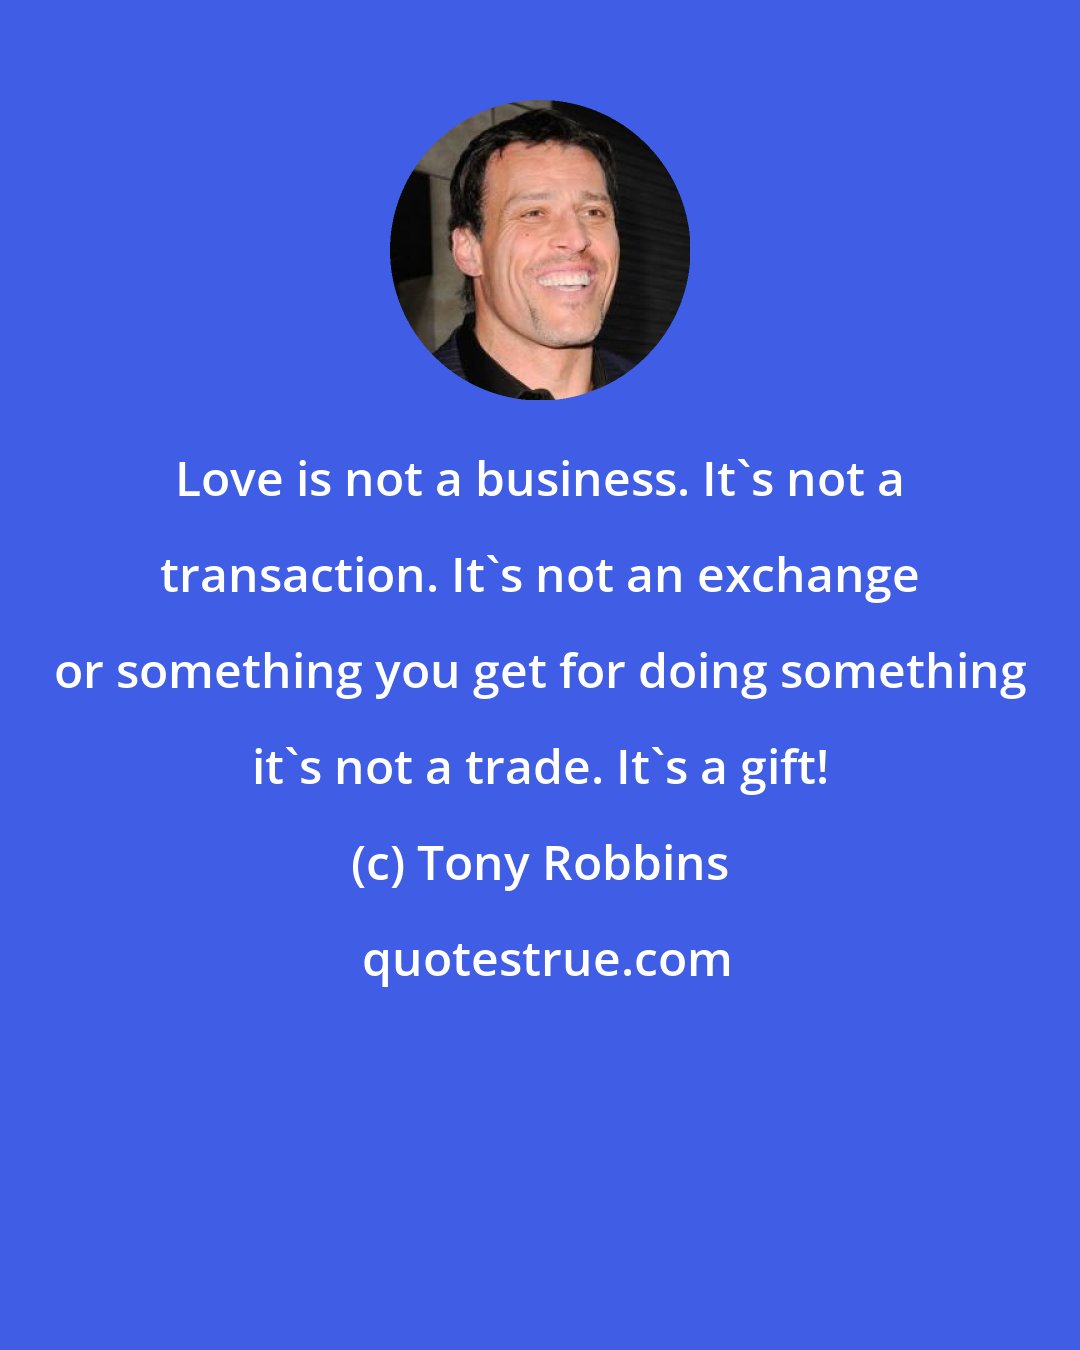 Tony Robbins: Love is not a business. It's not a transaction. It's not an exchange or something you get for doing something it's not a trade. It's a gift!